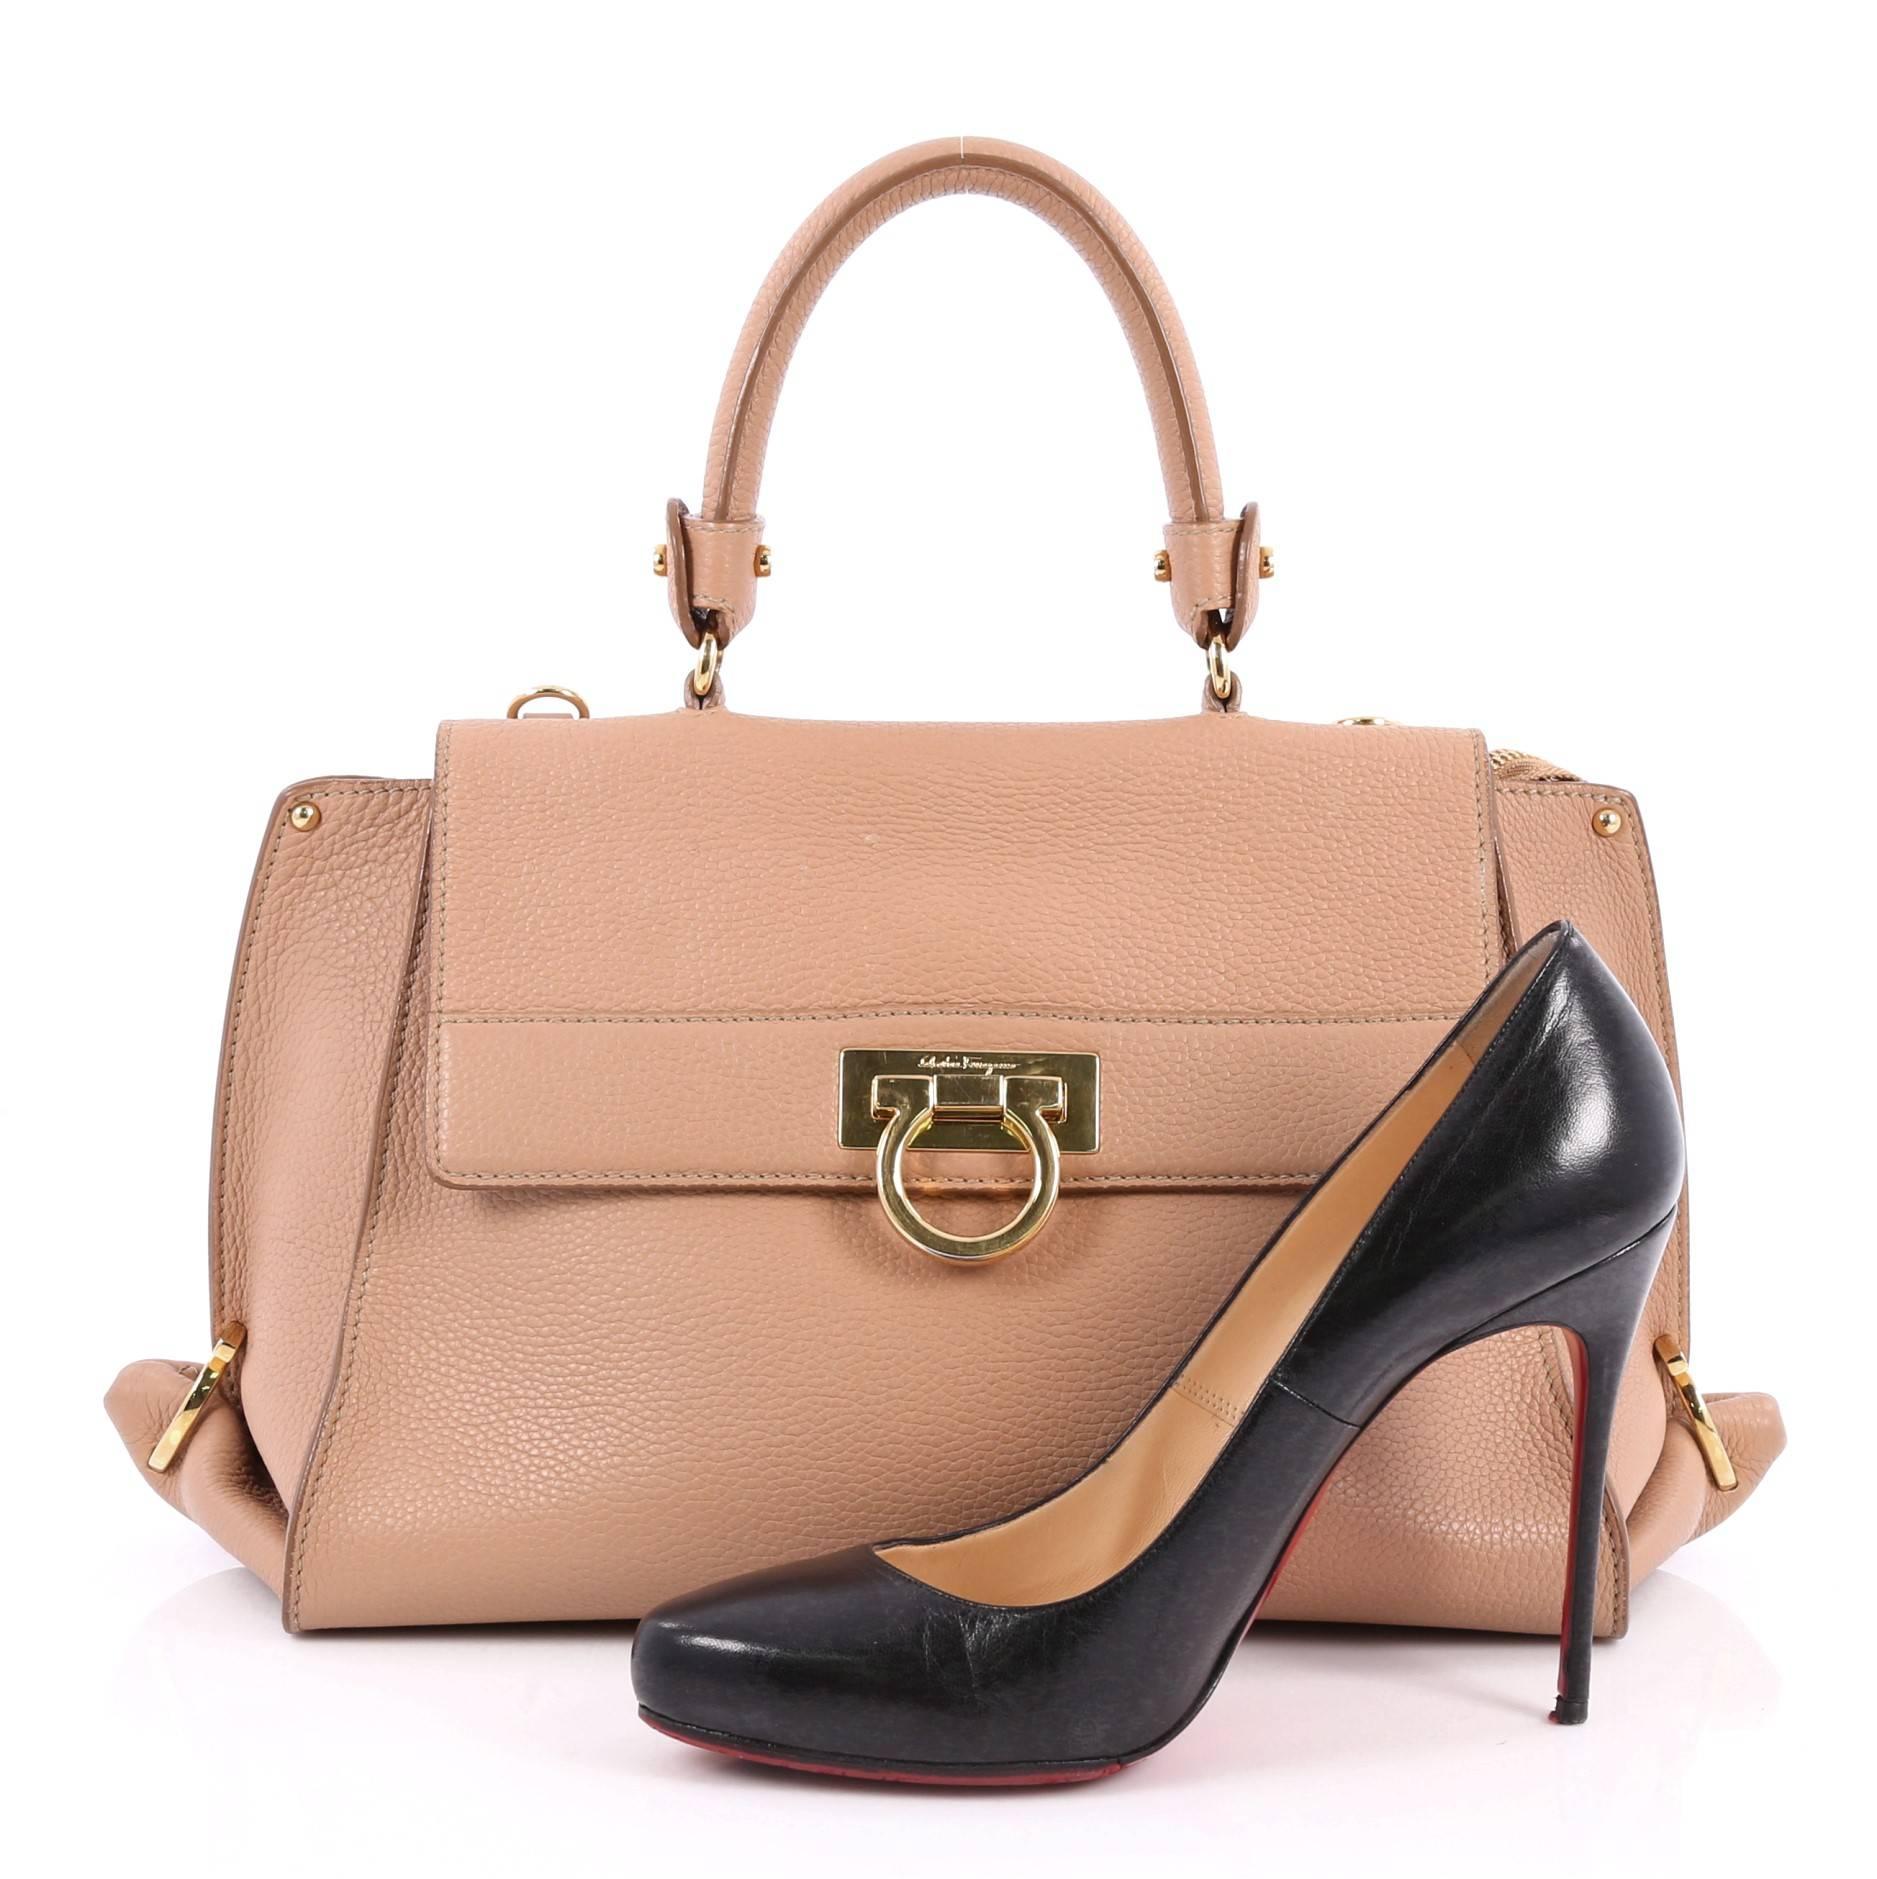 This authentic Salvatore Ferragamo Sofia Satchel Pebbled Leather Medium is a stylish and functional bag perfect for the modern woman. Crafted in nude pebbled leather, this bag features rolled leather handle, protective base studs, exterior back zip